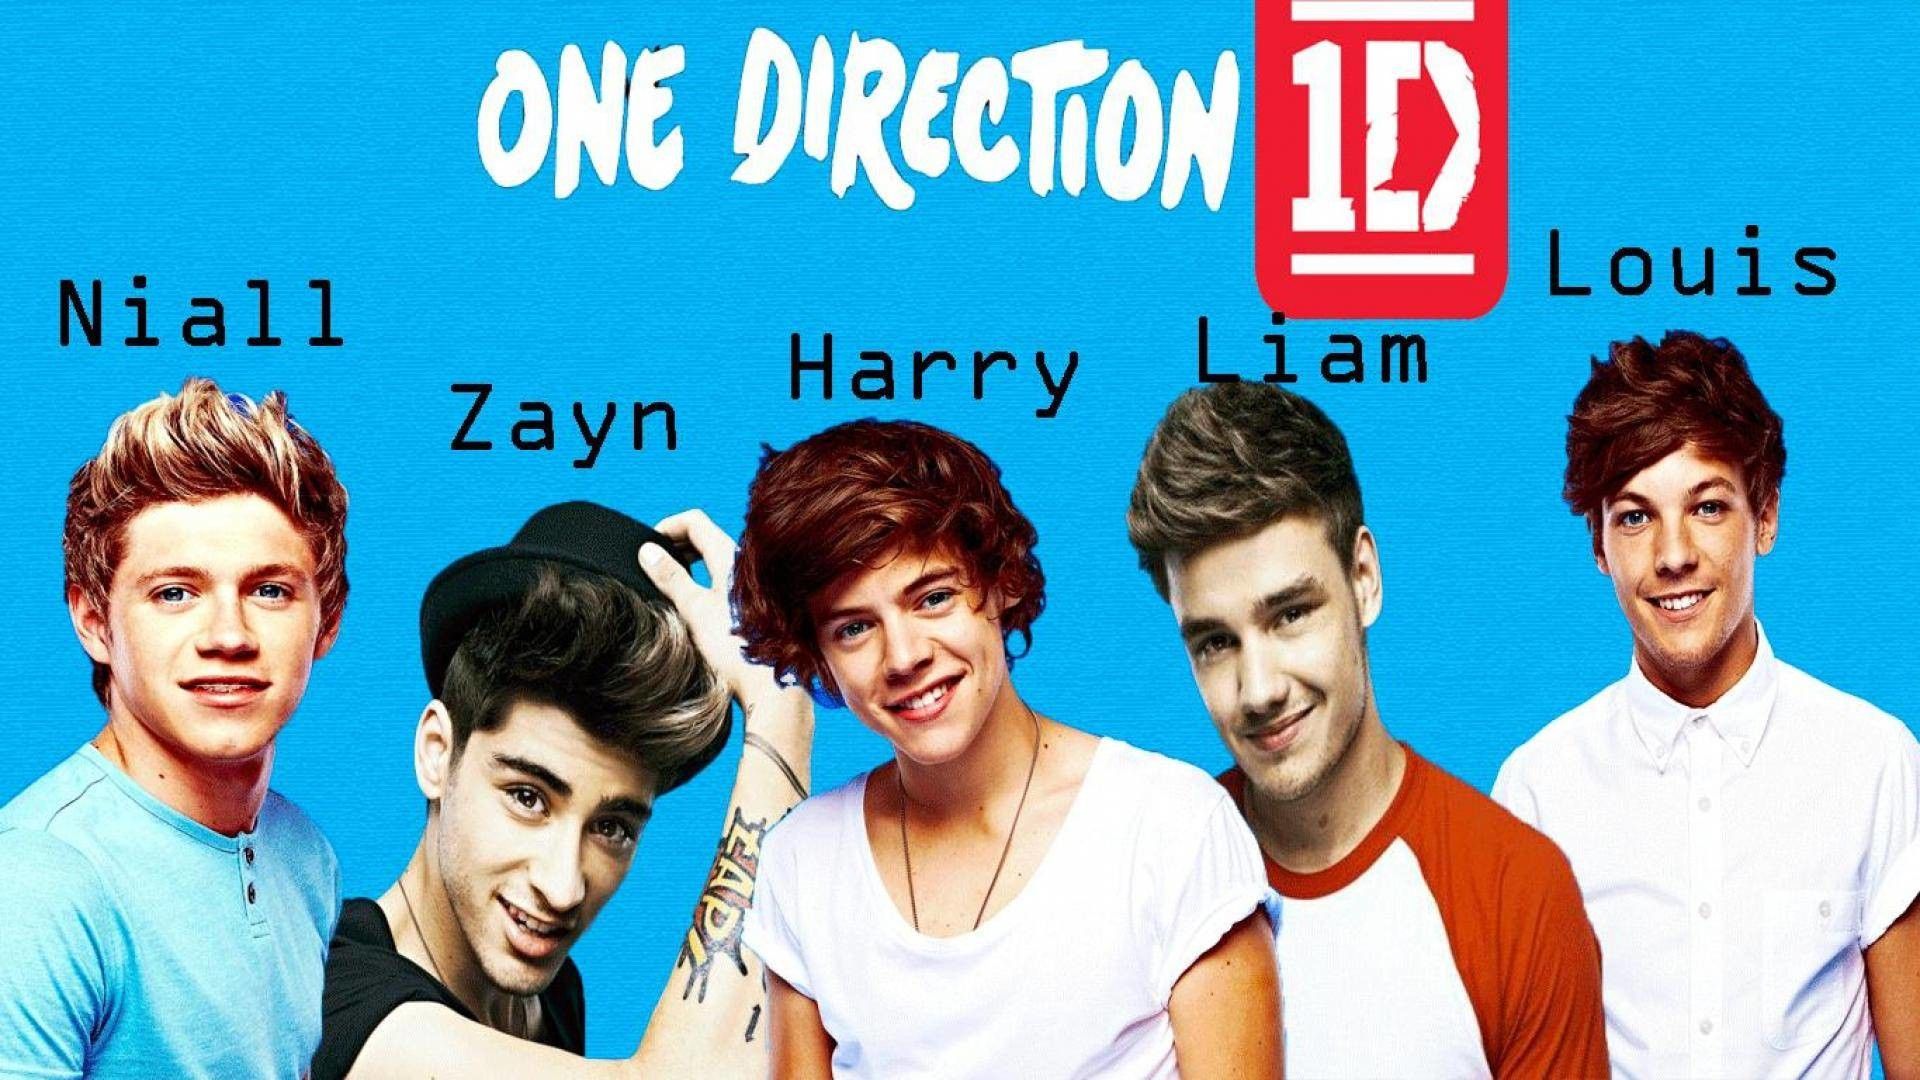 One direction idol poster - One Direction